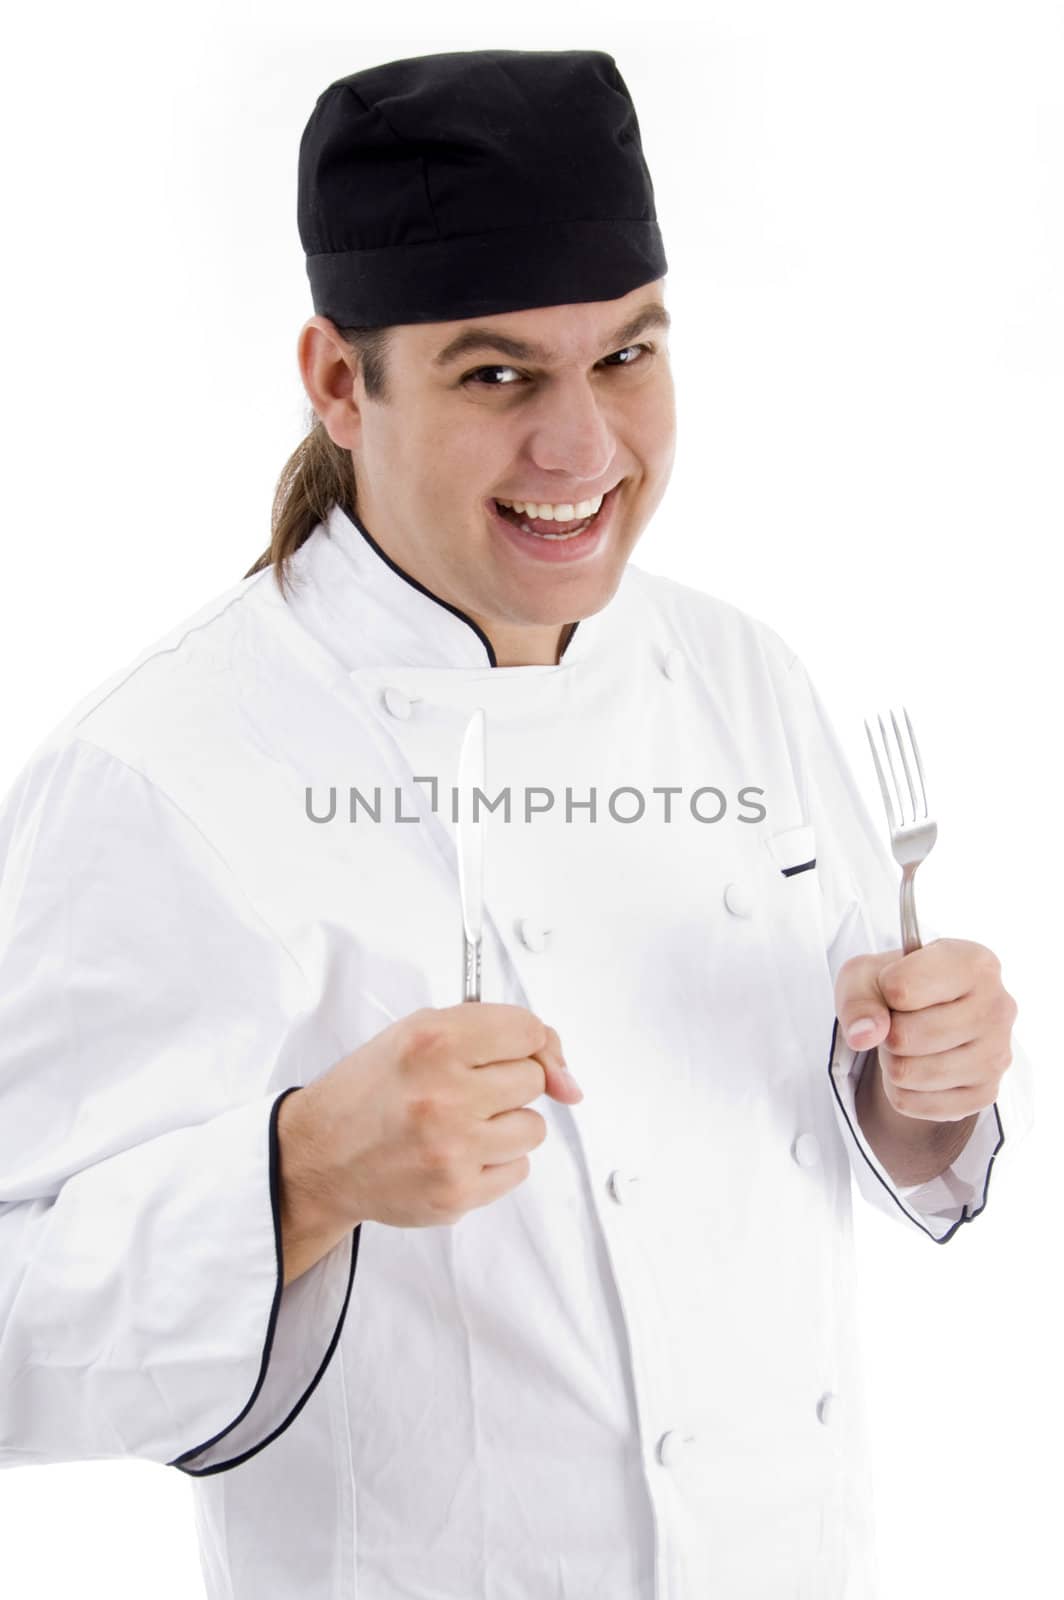 portrait of young chef smiling by imagerymajestic